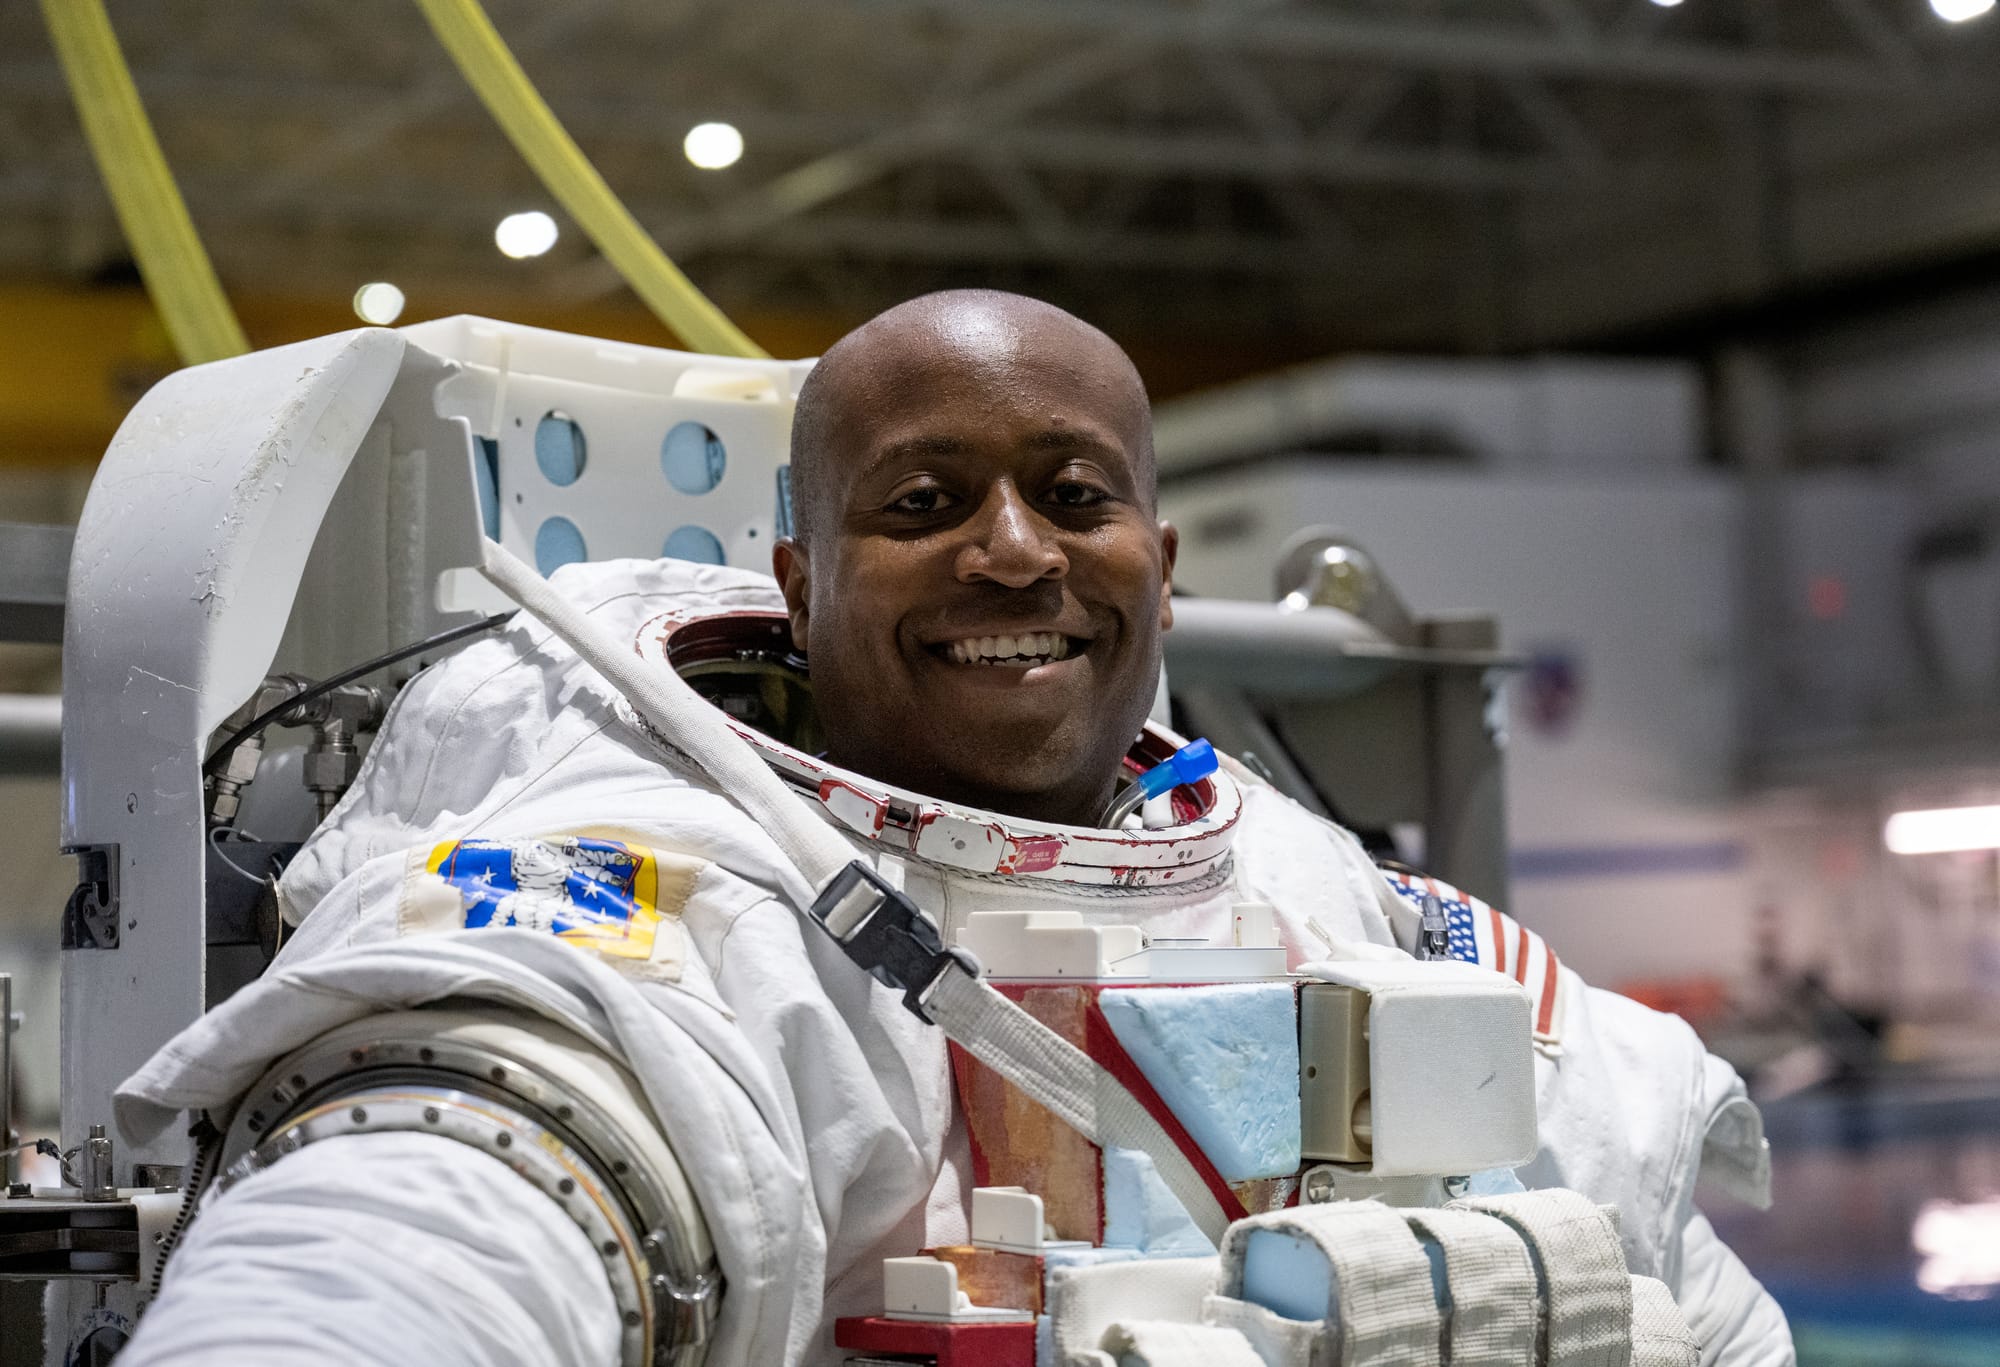 Andre Douglas during training in the neutral buoyancy lab. ©NASA